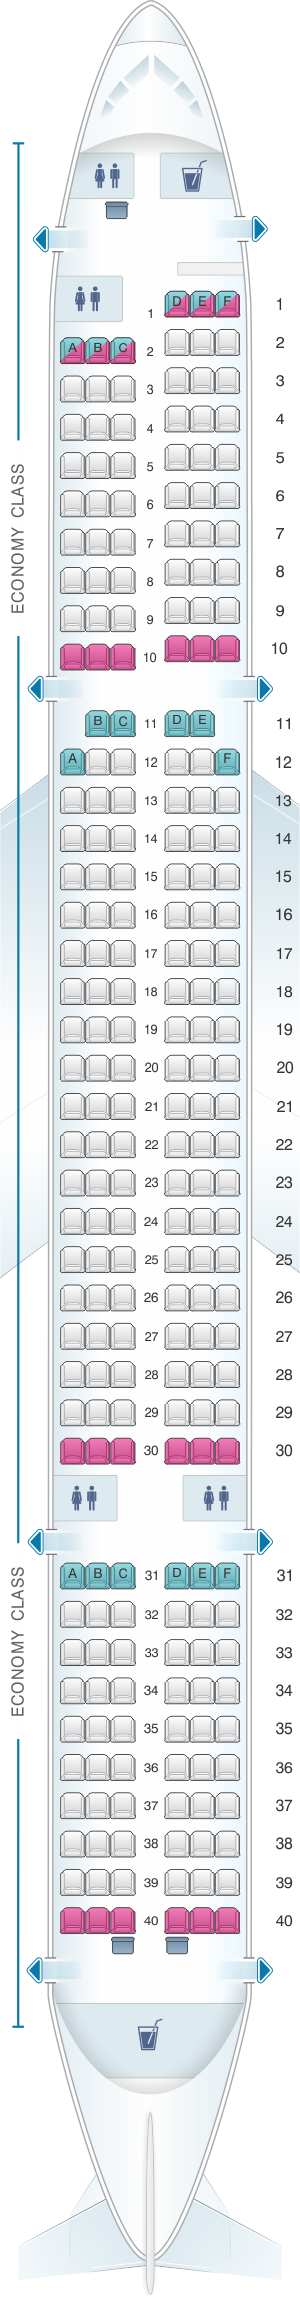 Seat map for Monarch Airlines Boeing B757 200